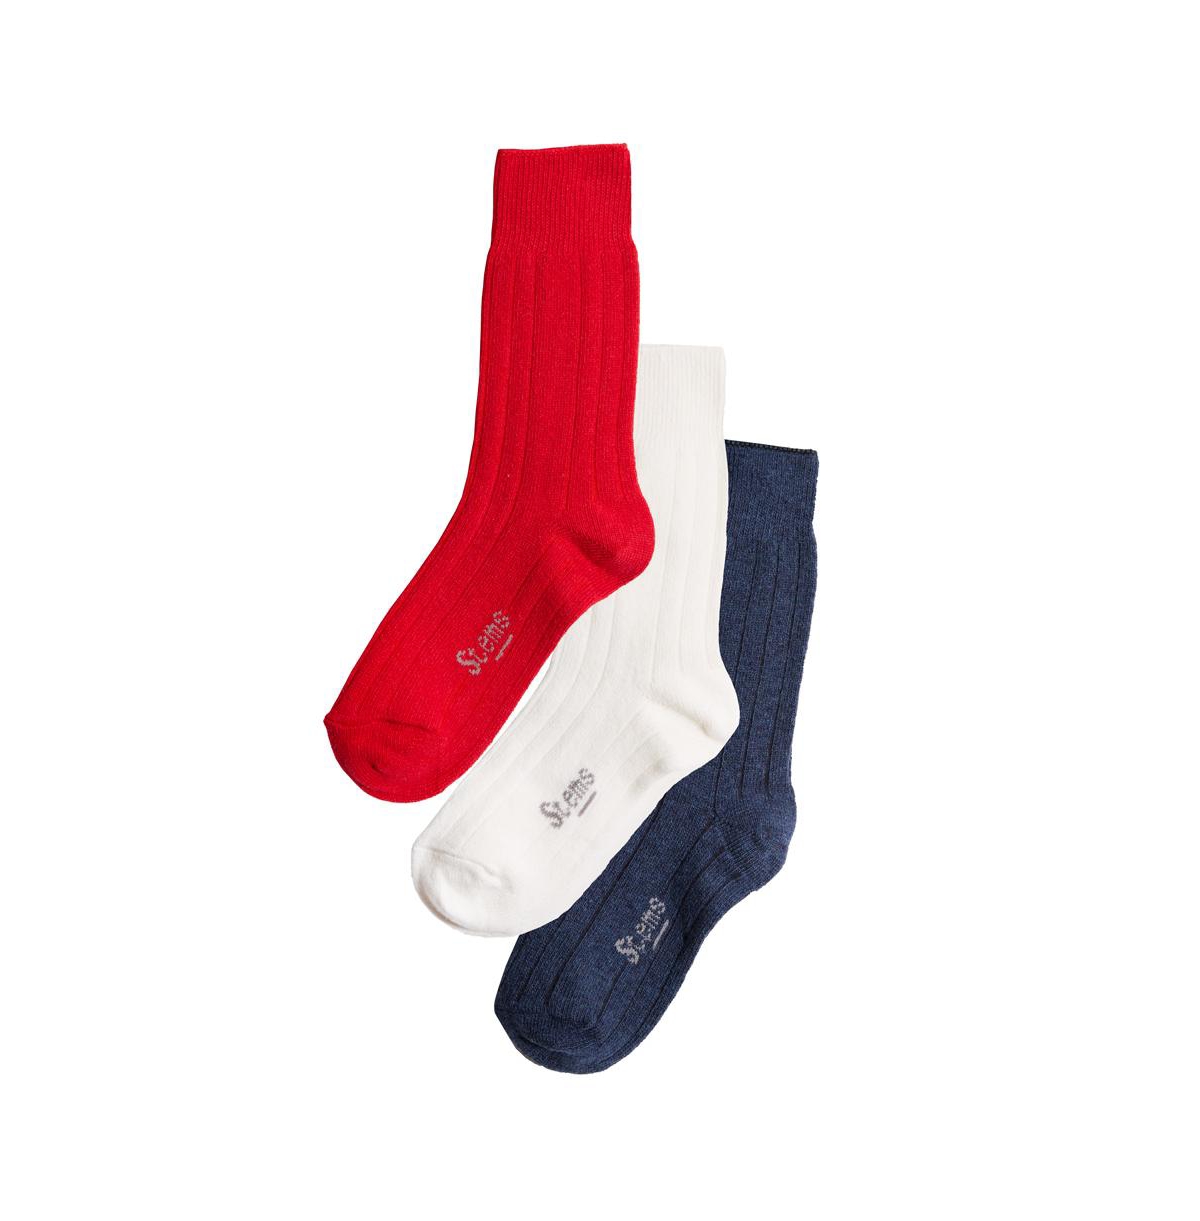 Lux Cashmere Wool Socks Box Of Three - Navy/ivory/red